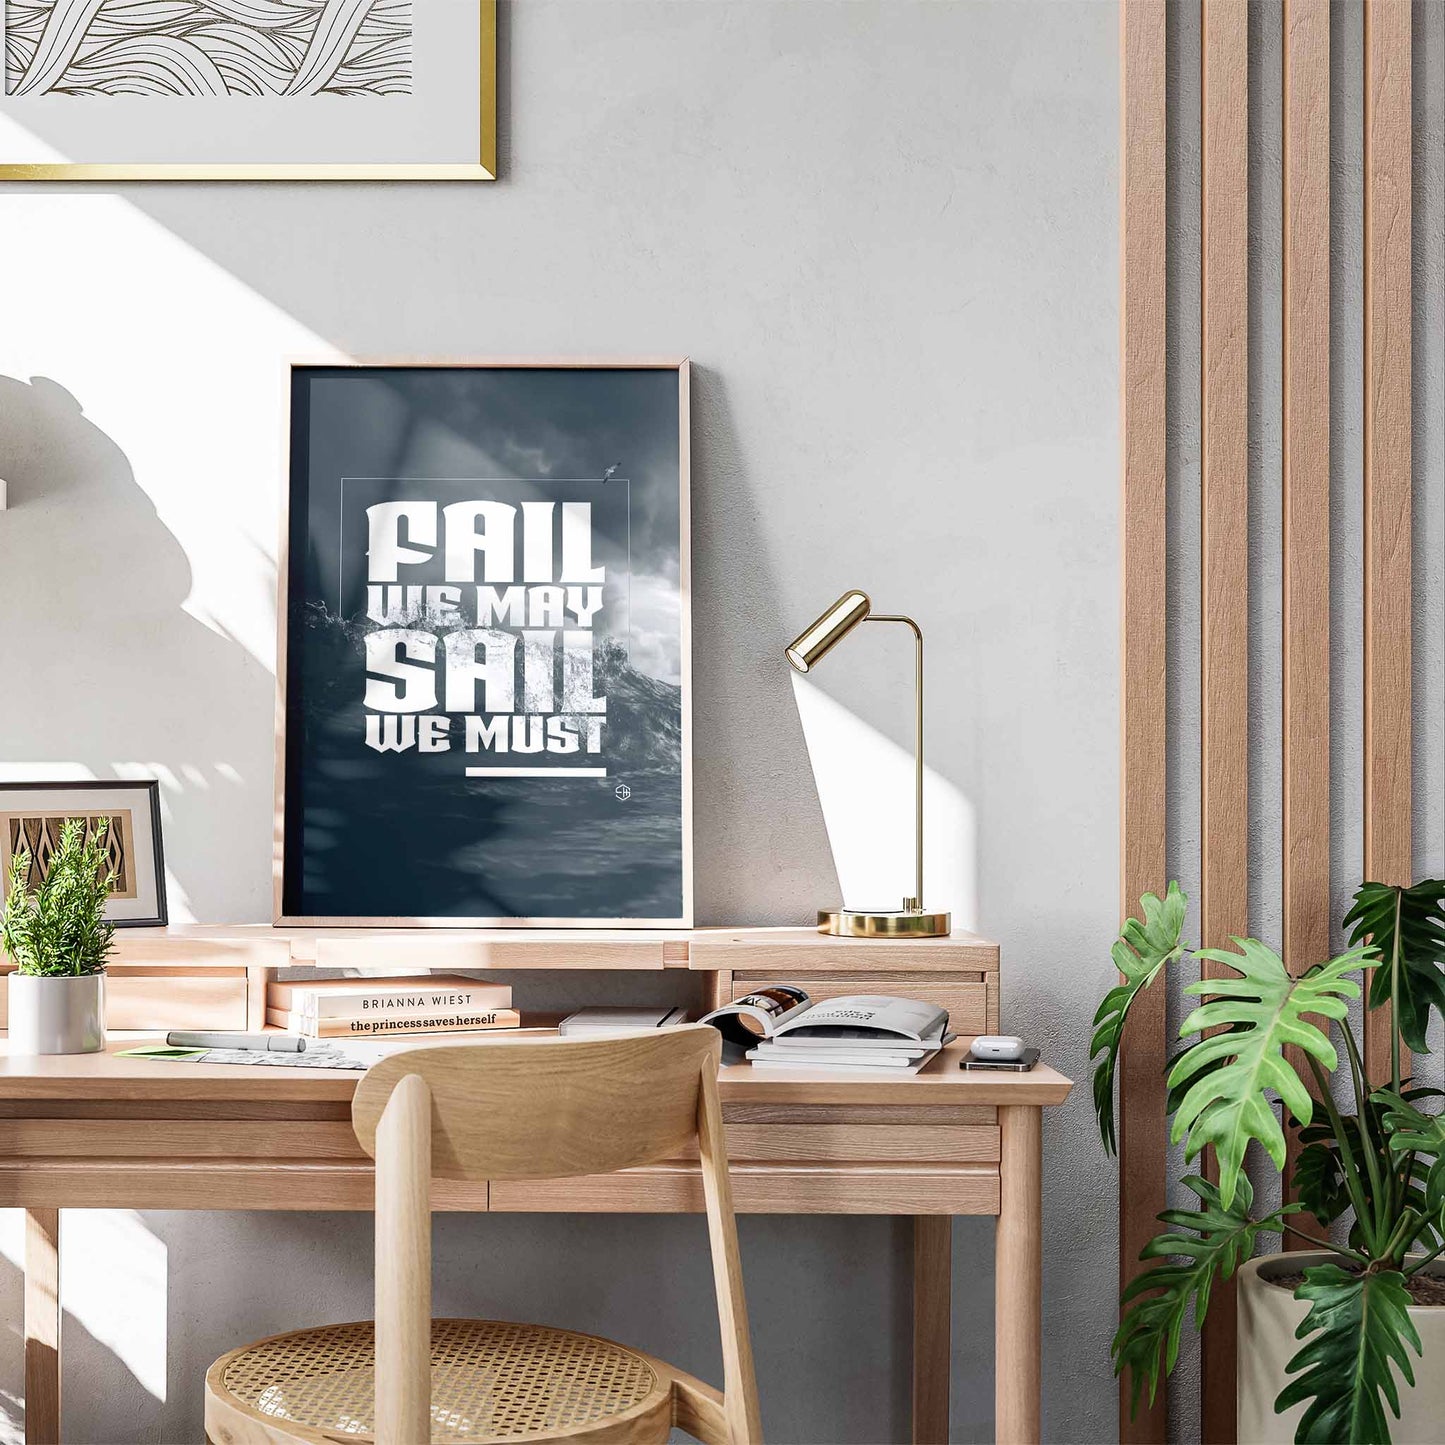 Fail We May, Sail We Must Andrew Weatherall Design